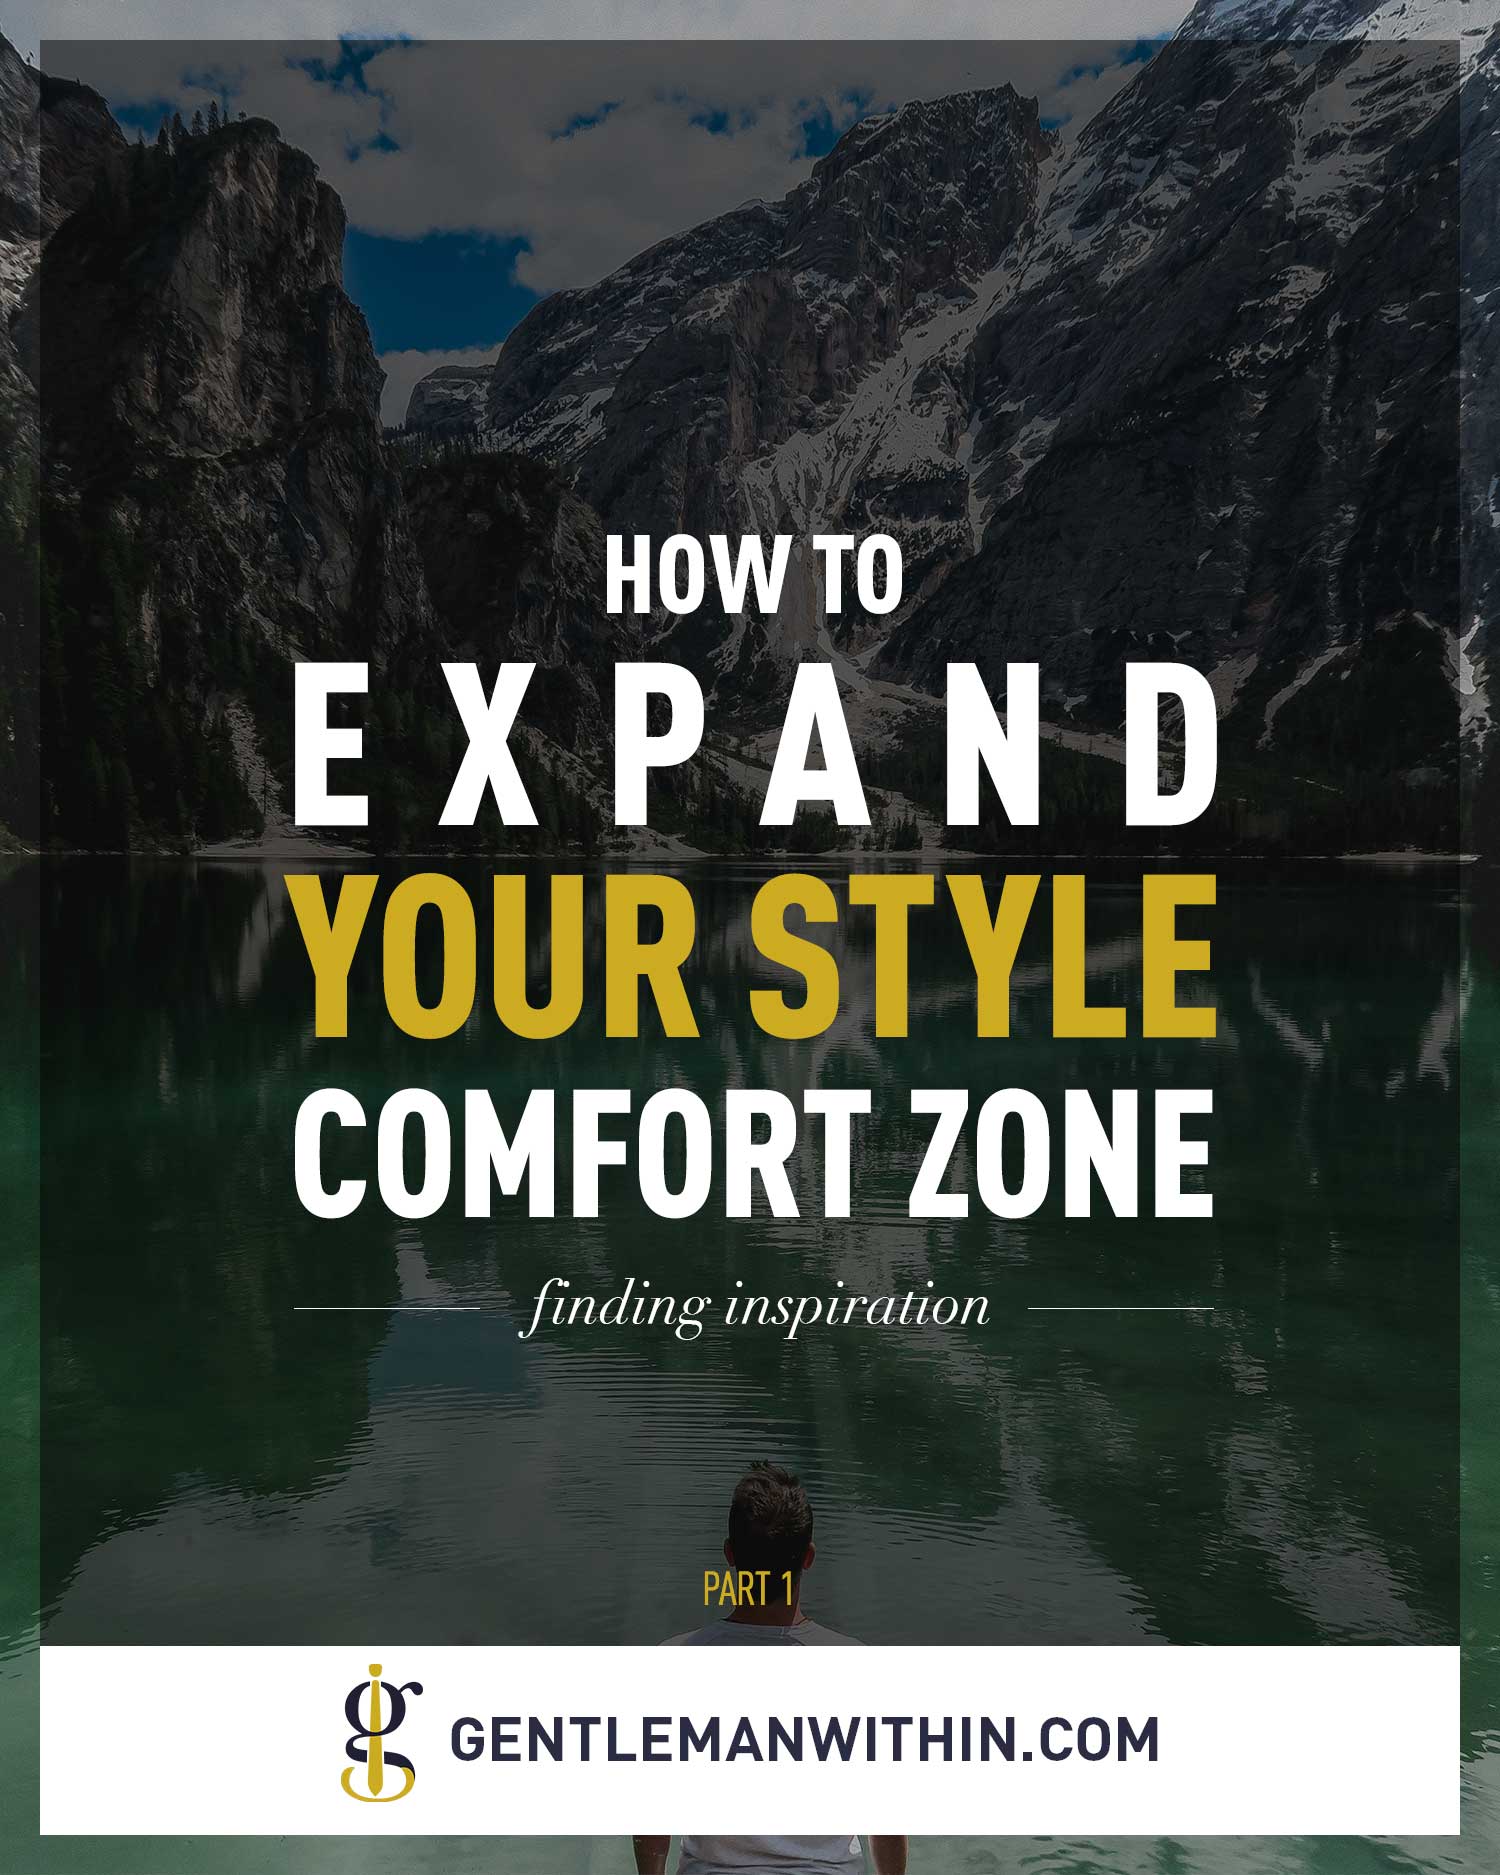 How To Expand Your Style Comfort Zone: Finding Inspiration | Gentleman Within